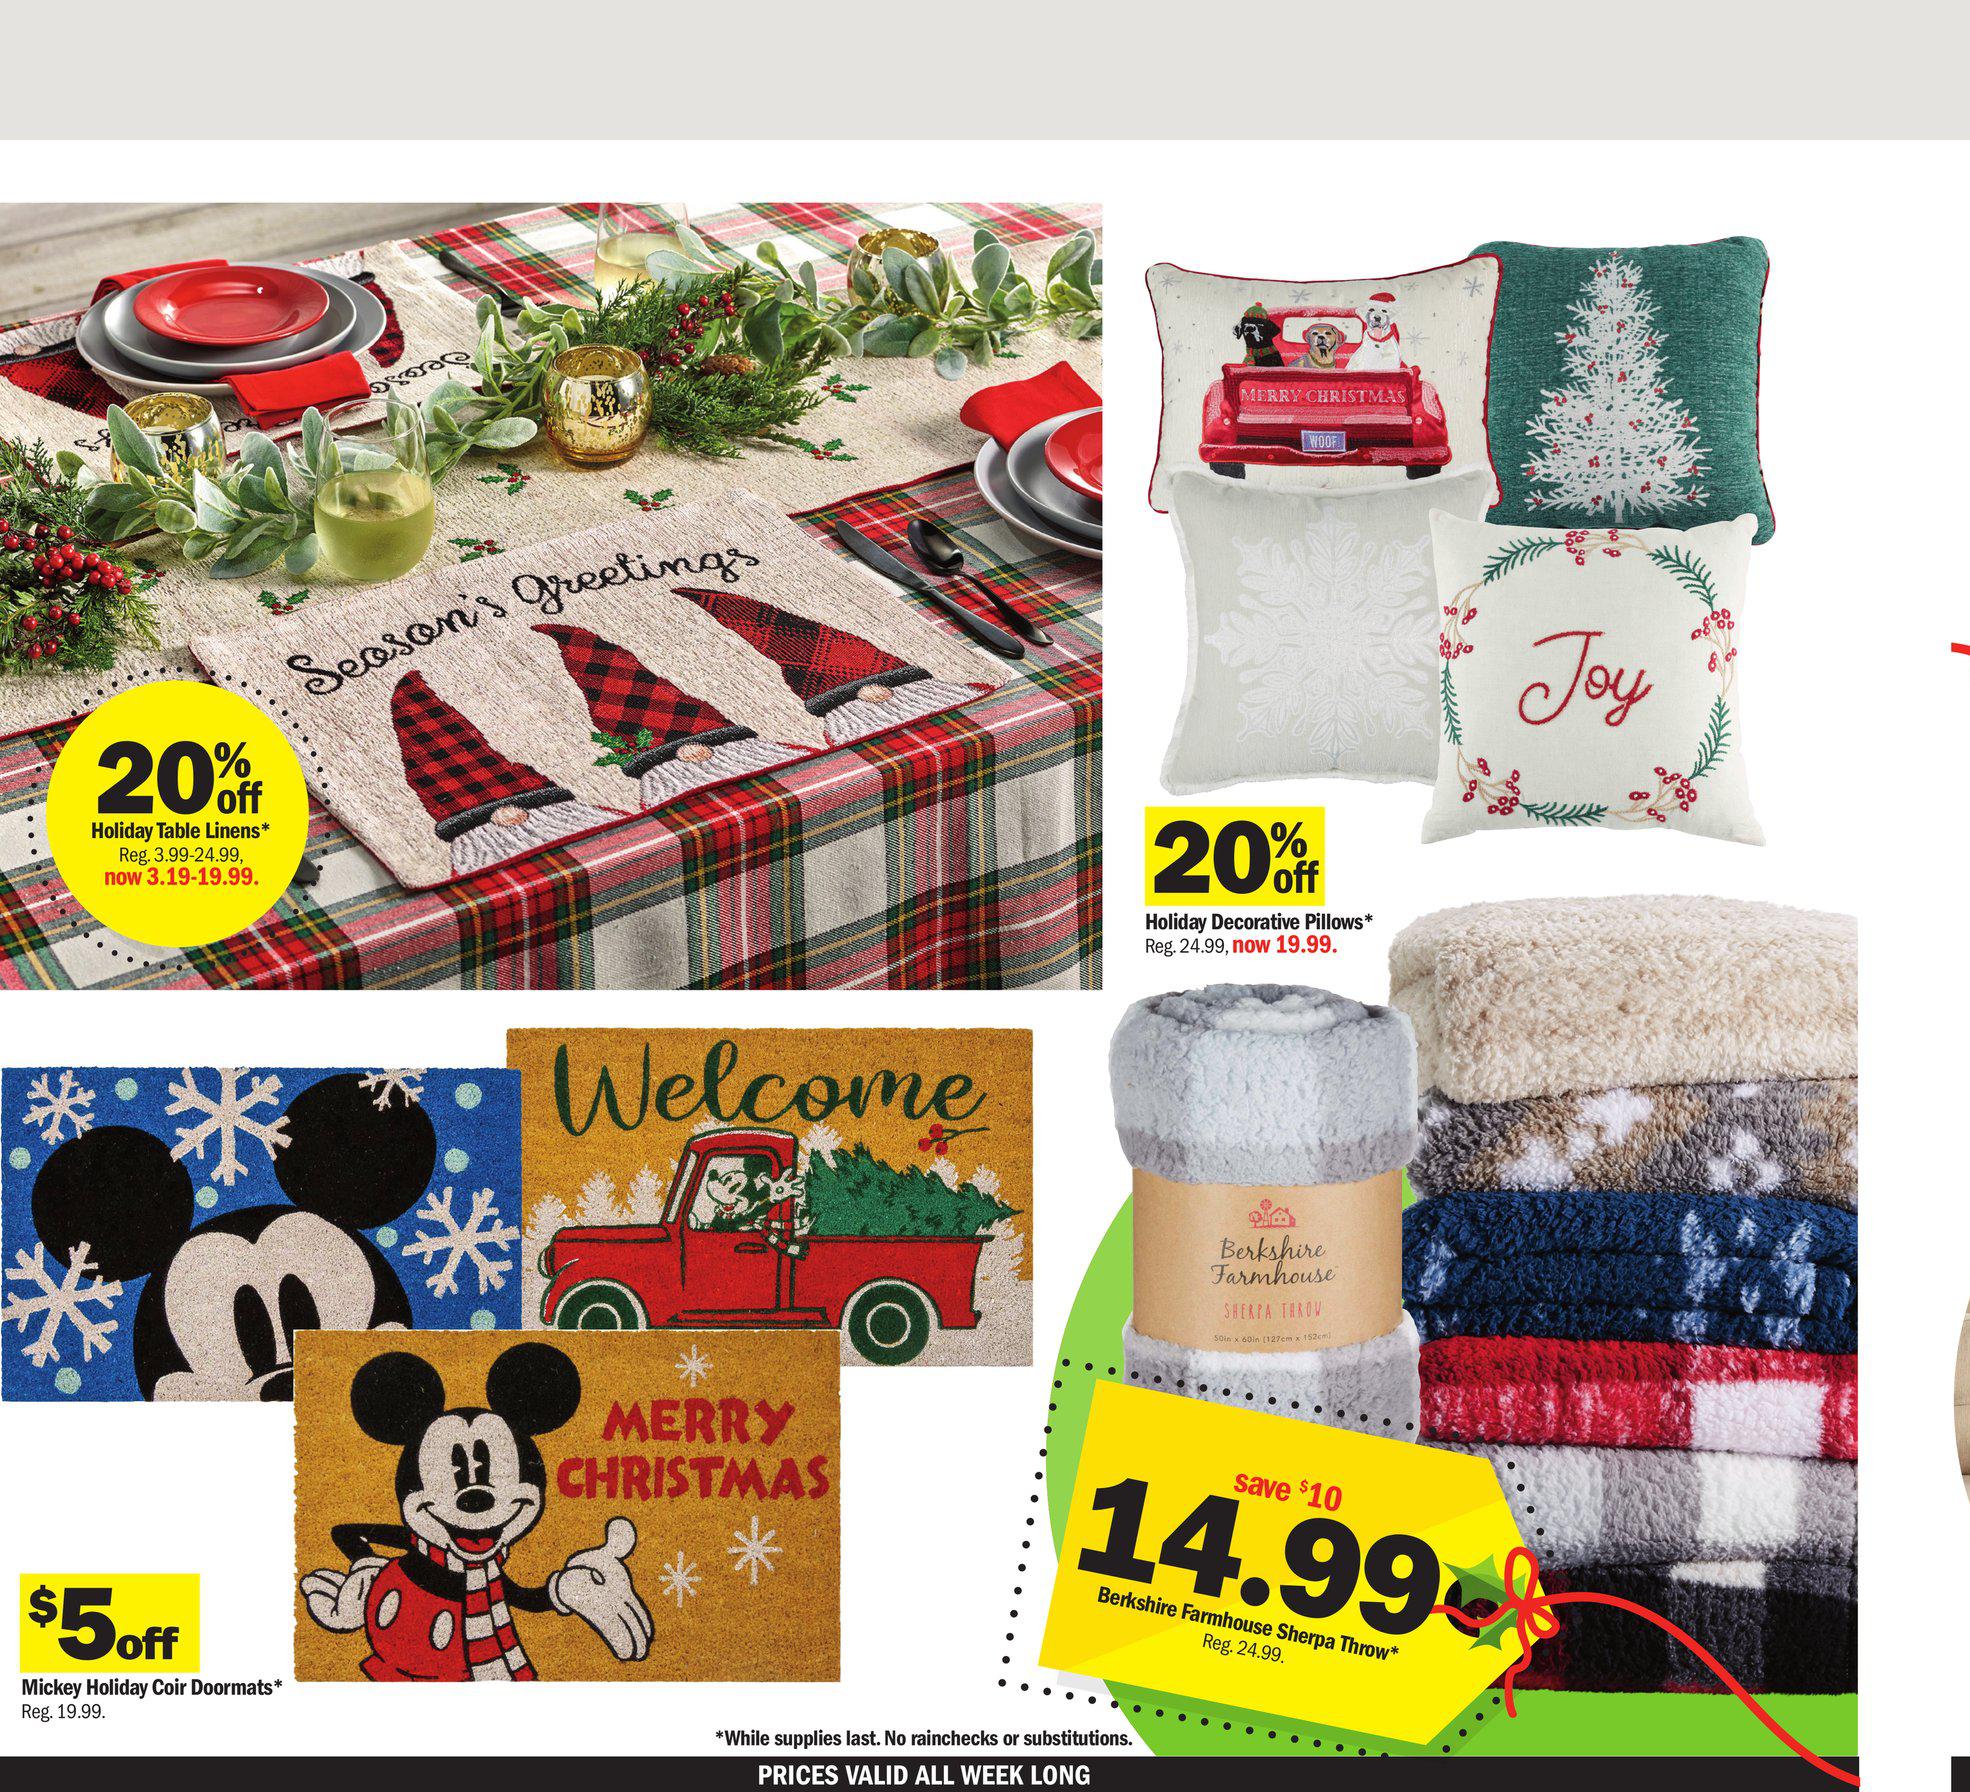 21.11.2021 Meijer ad 10. page